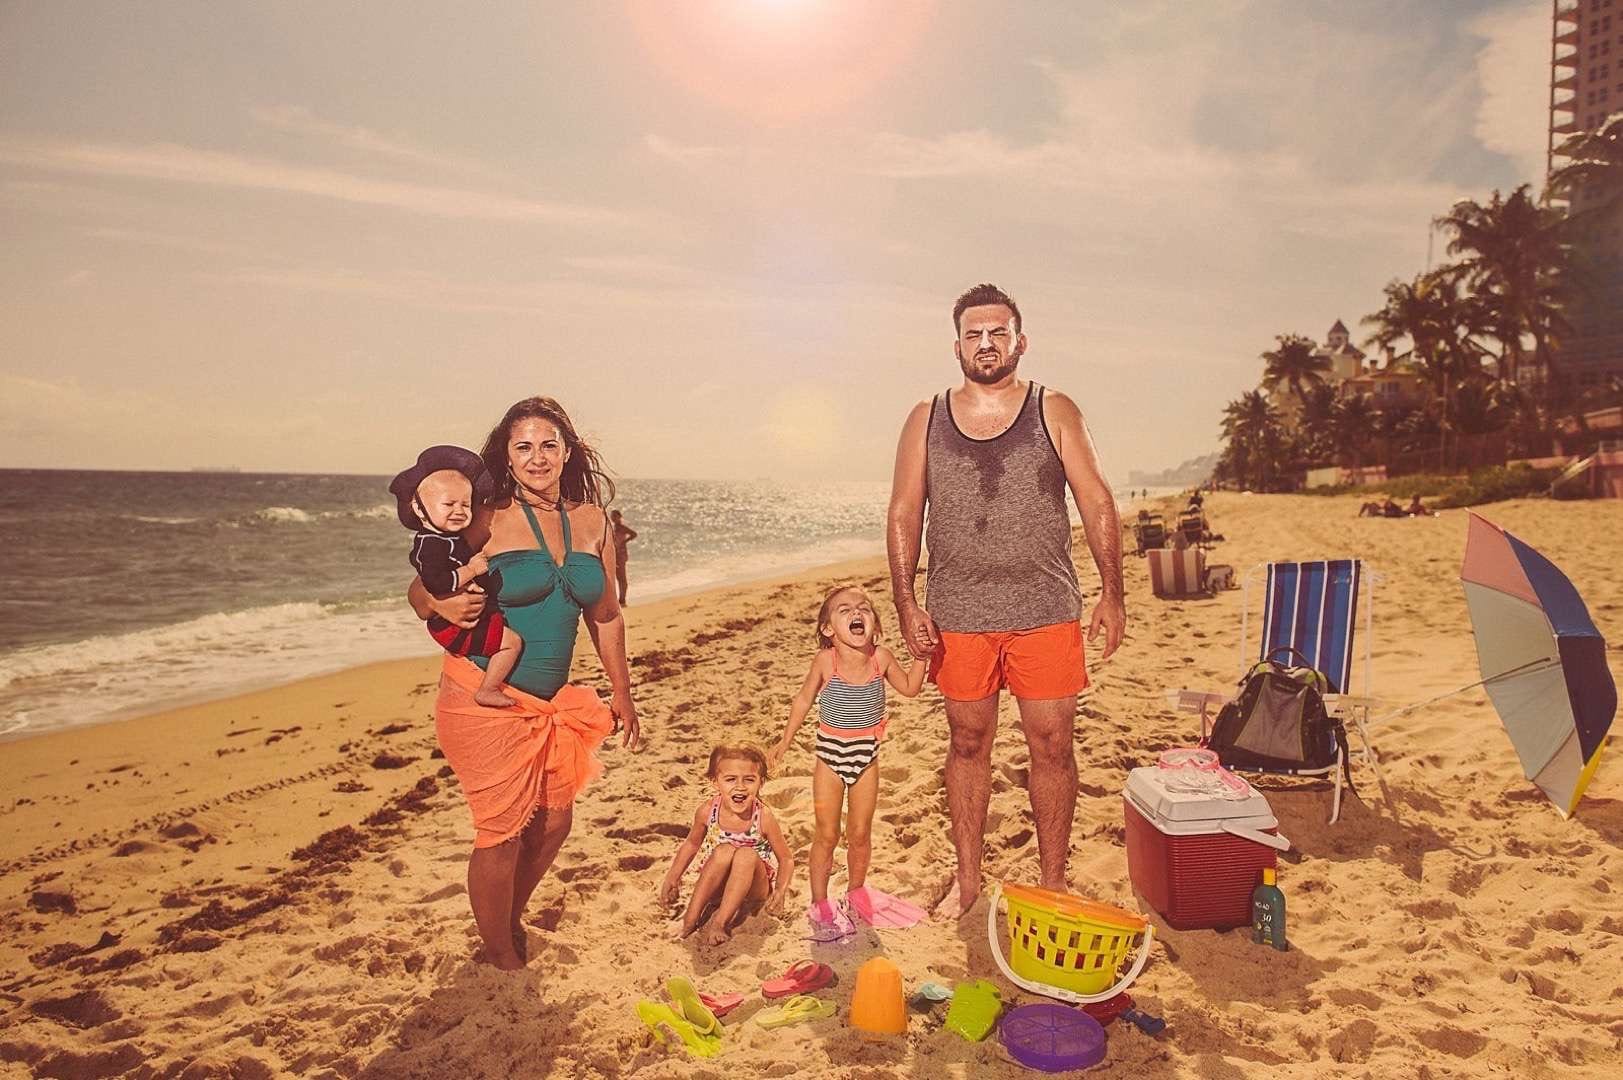 A Series of Unfortunate Family Portraits showing a family with three small children on the beach with beach related items.